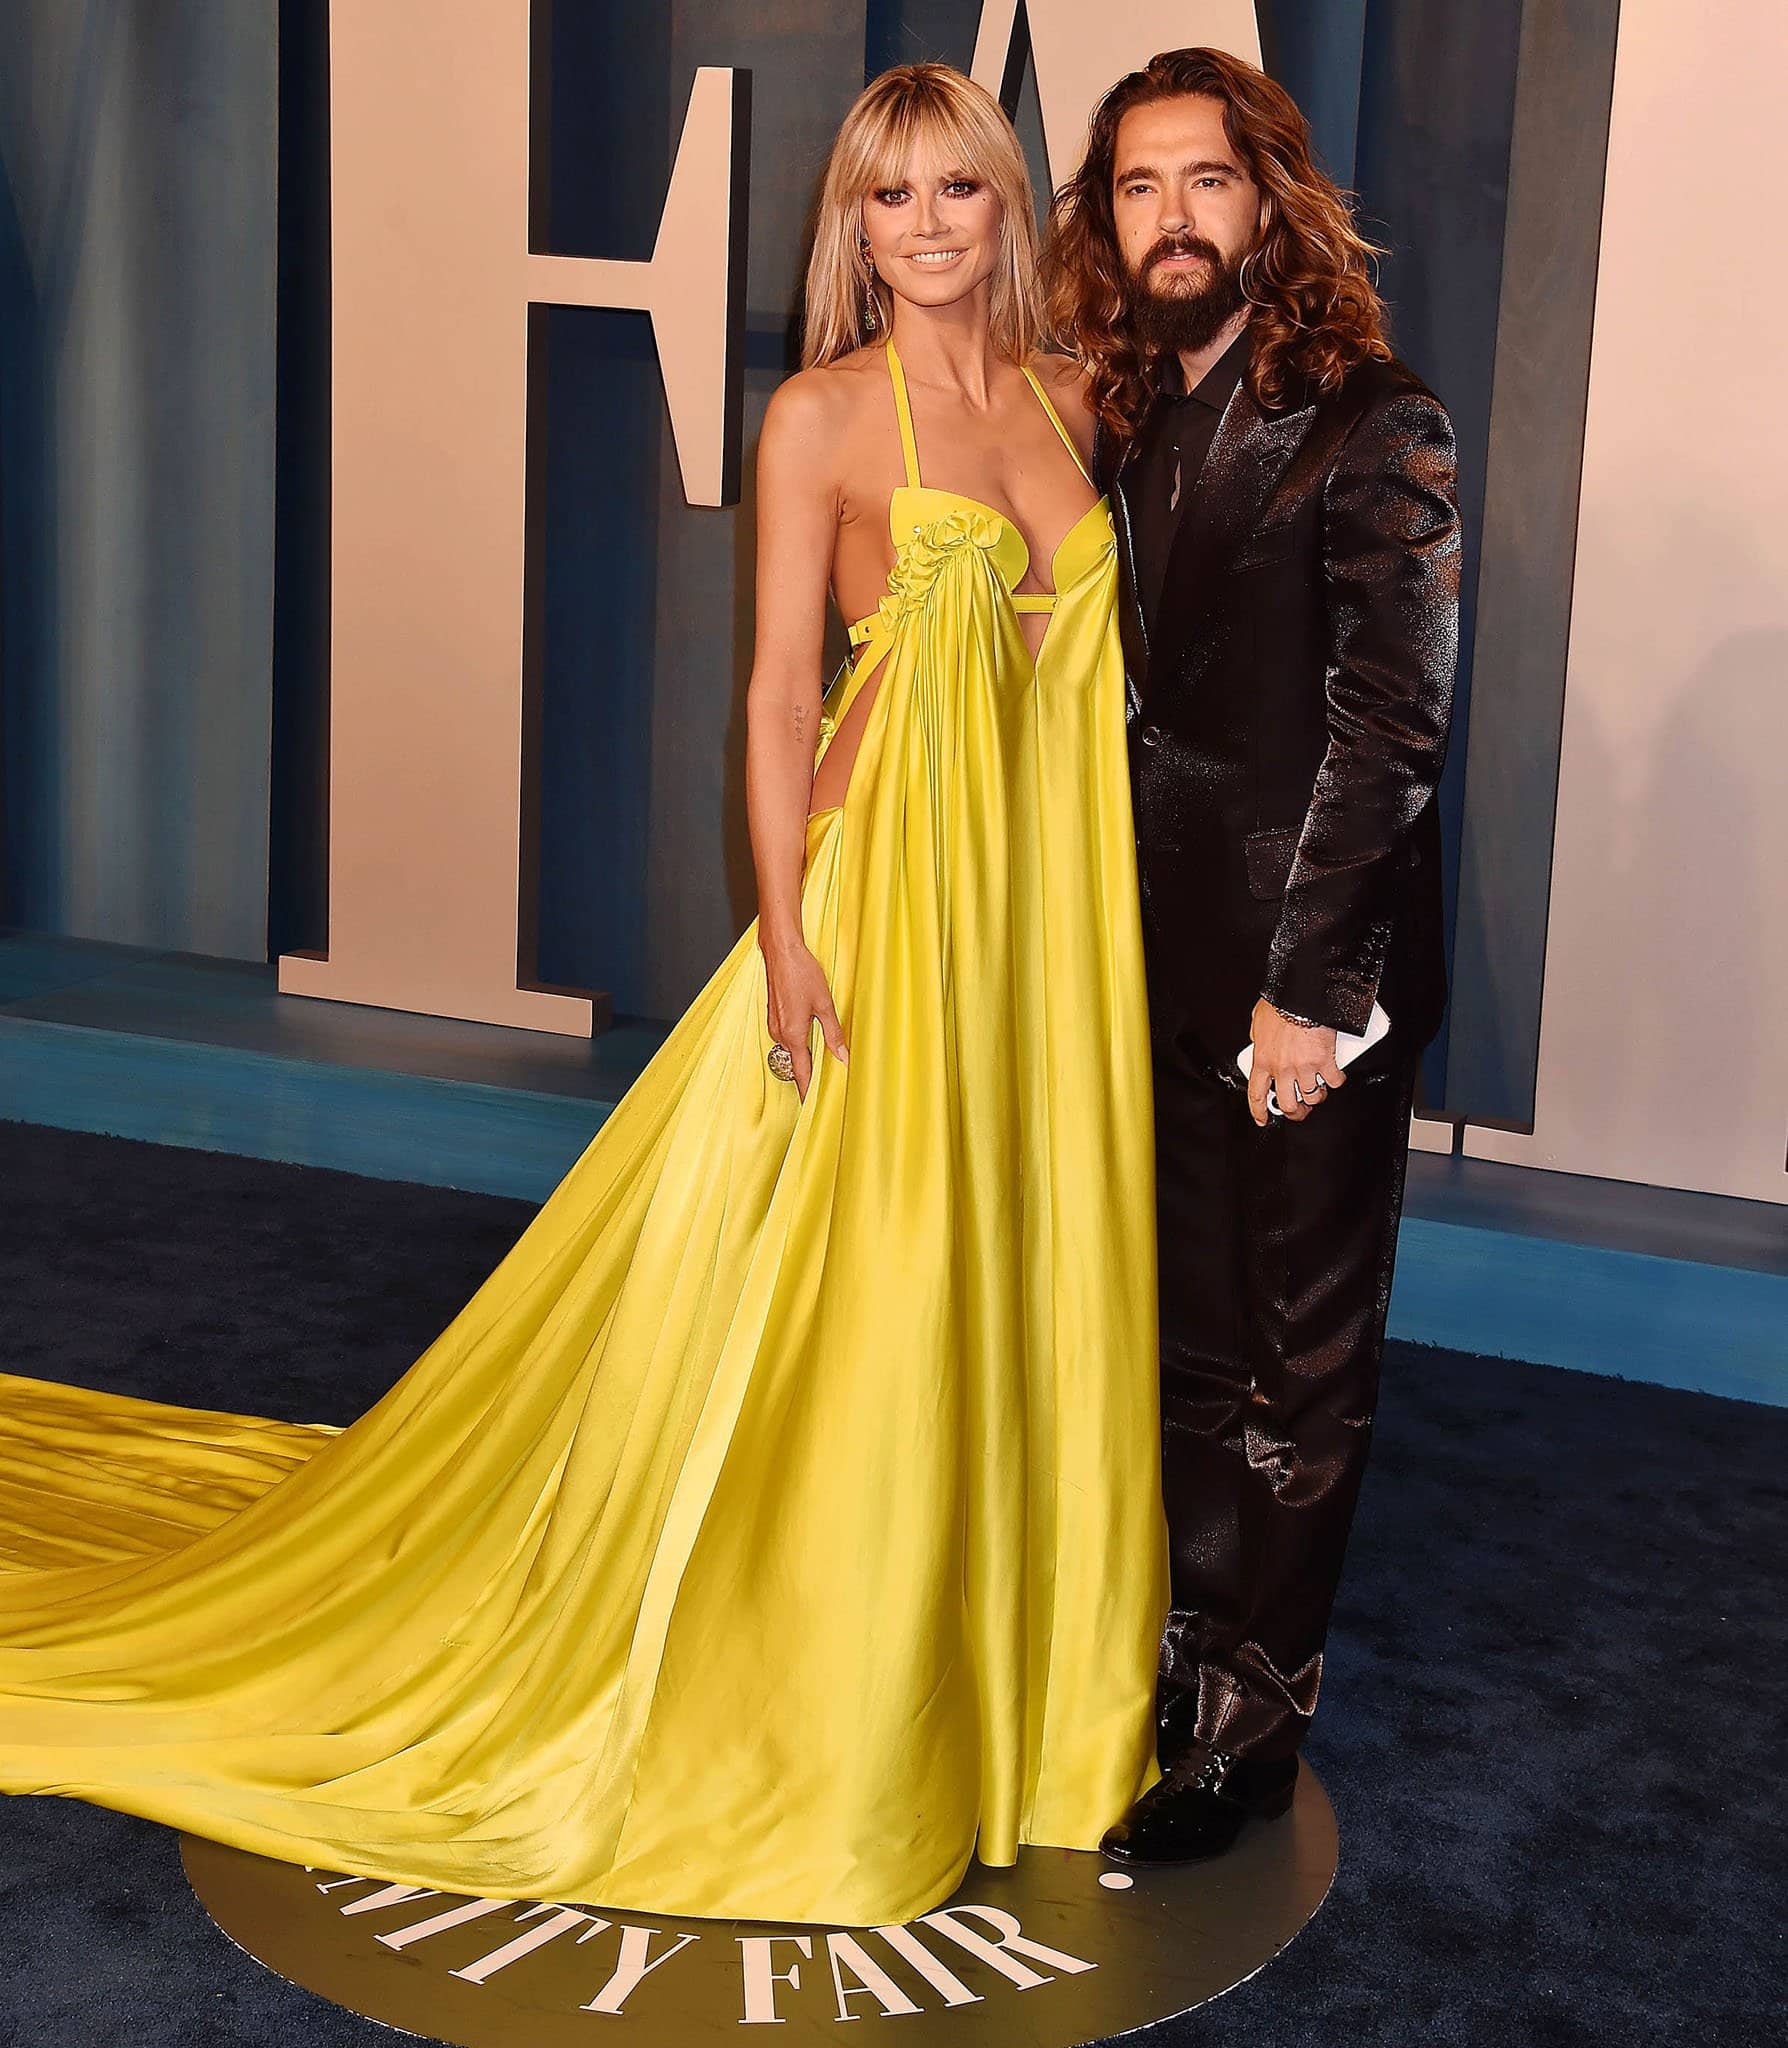 Heidi Klum poses with her husband Tom Kaulitz at the Vanity Fair Oscar Party in a yellow Az Factory gown with a structured bra and daring cutouts on March 27, 2022